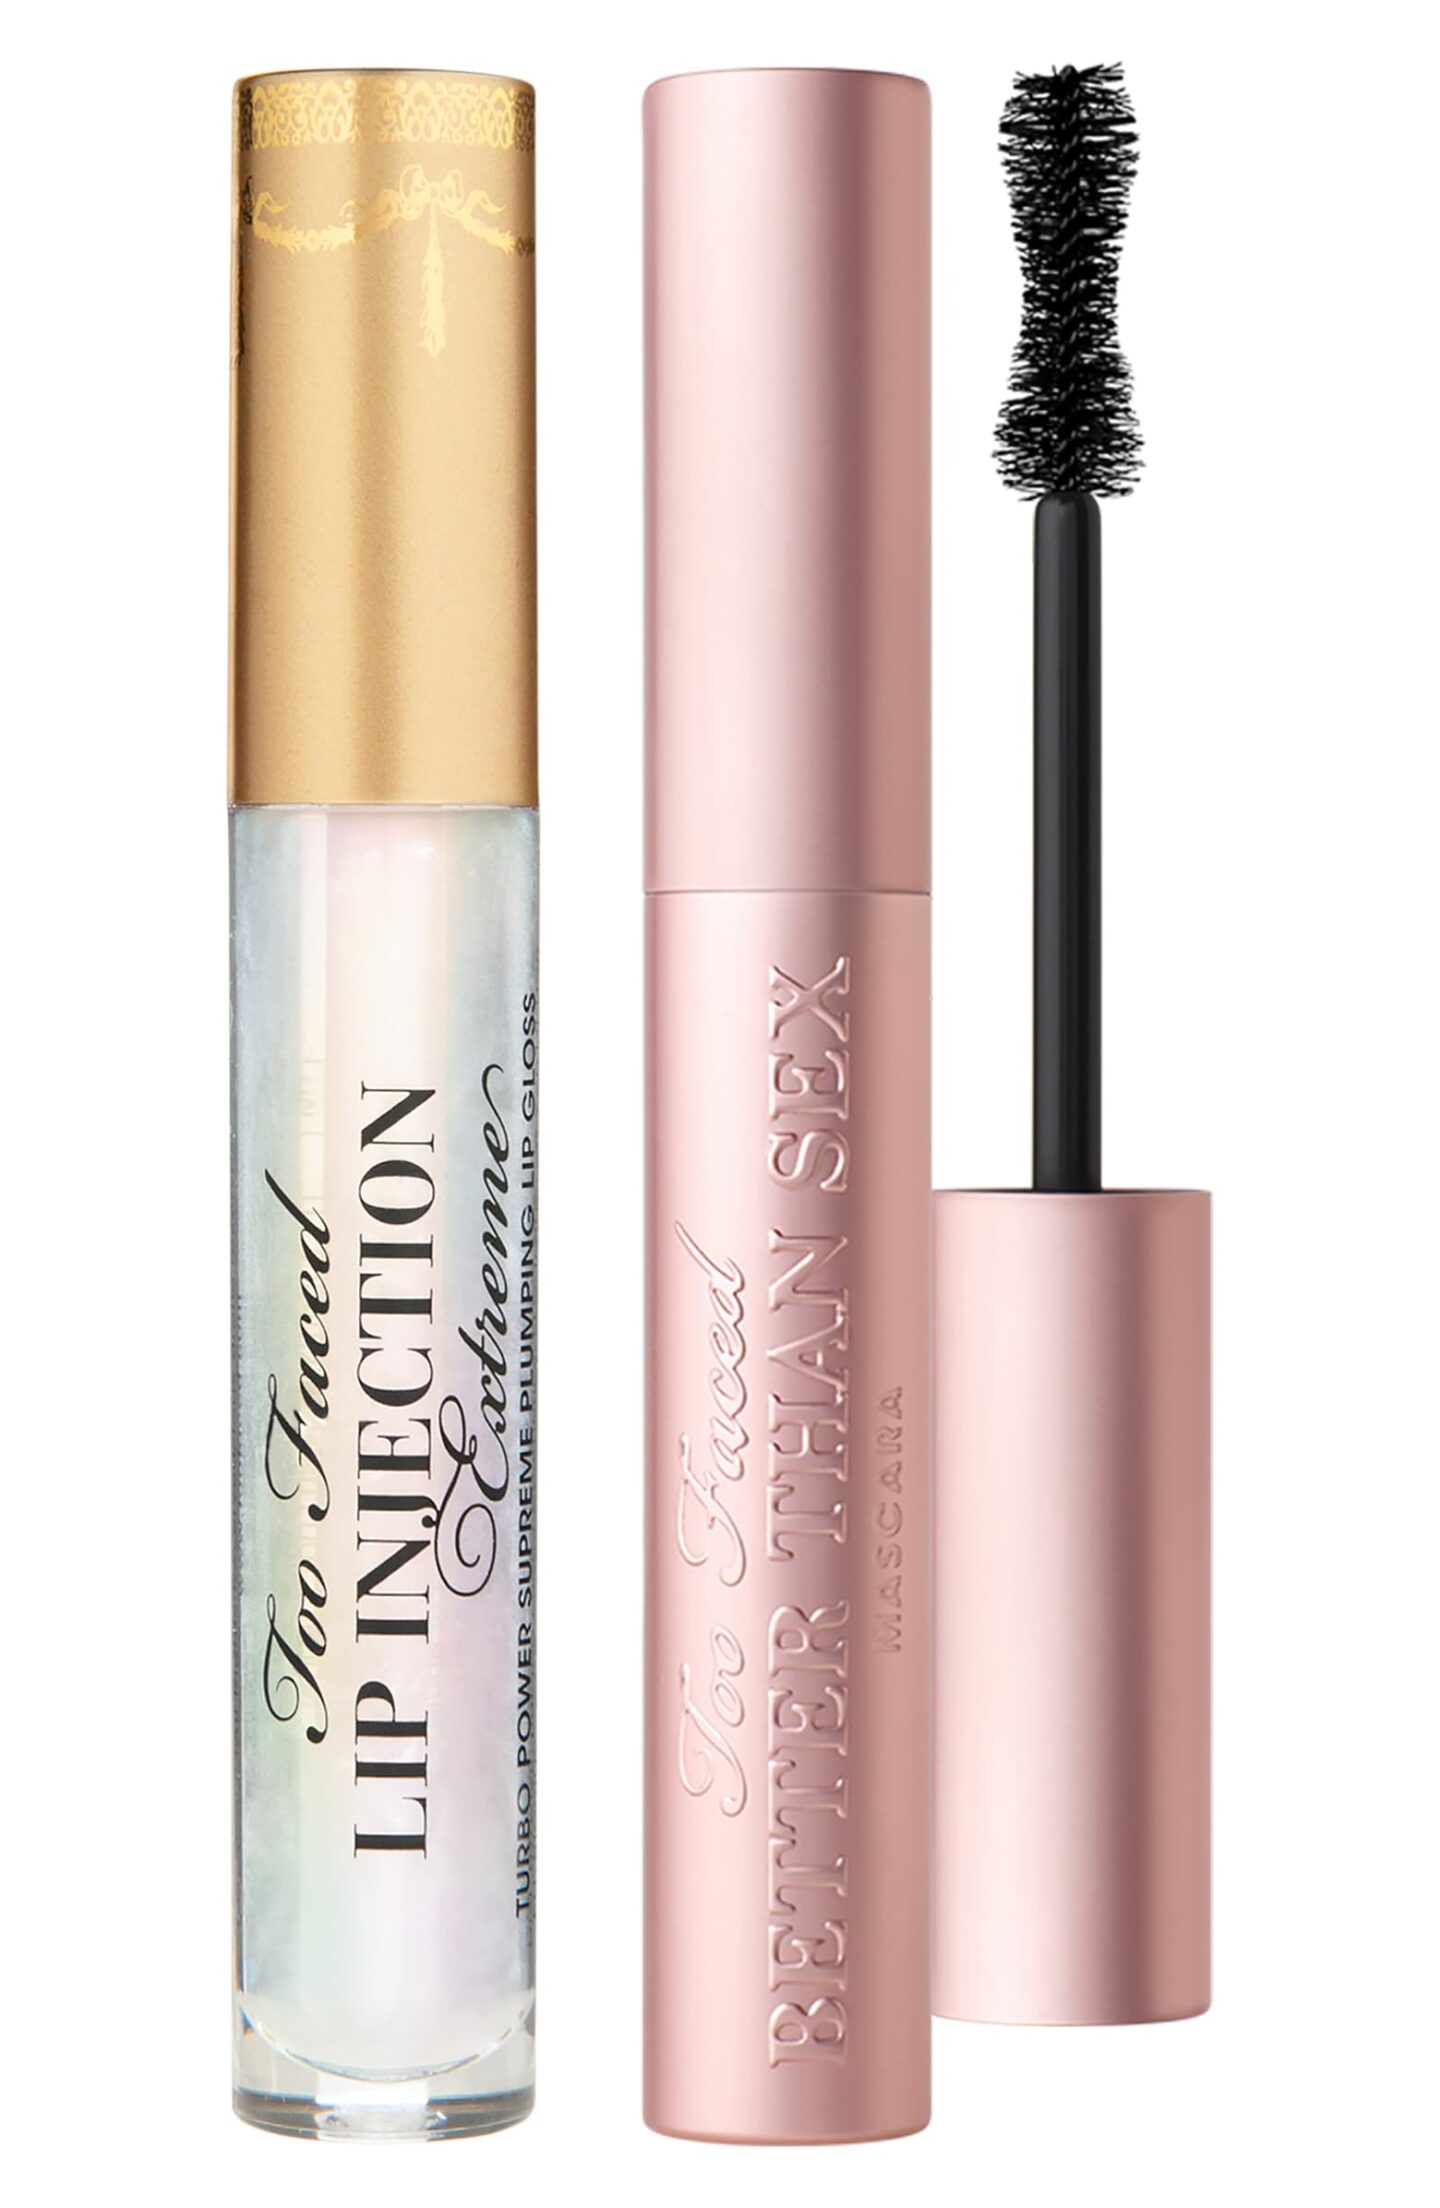 too faced lips and lashes 2020 nordstrom anniversary sale